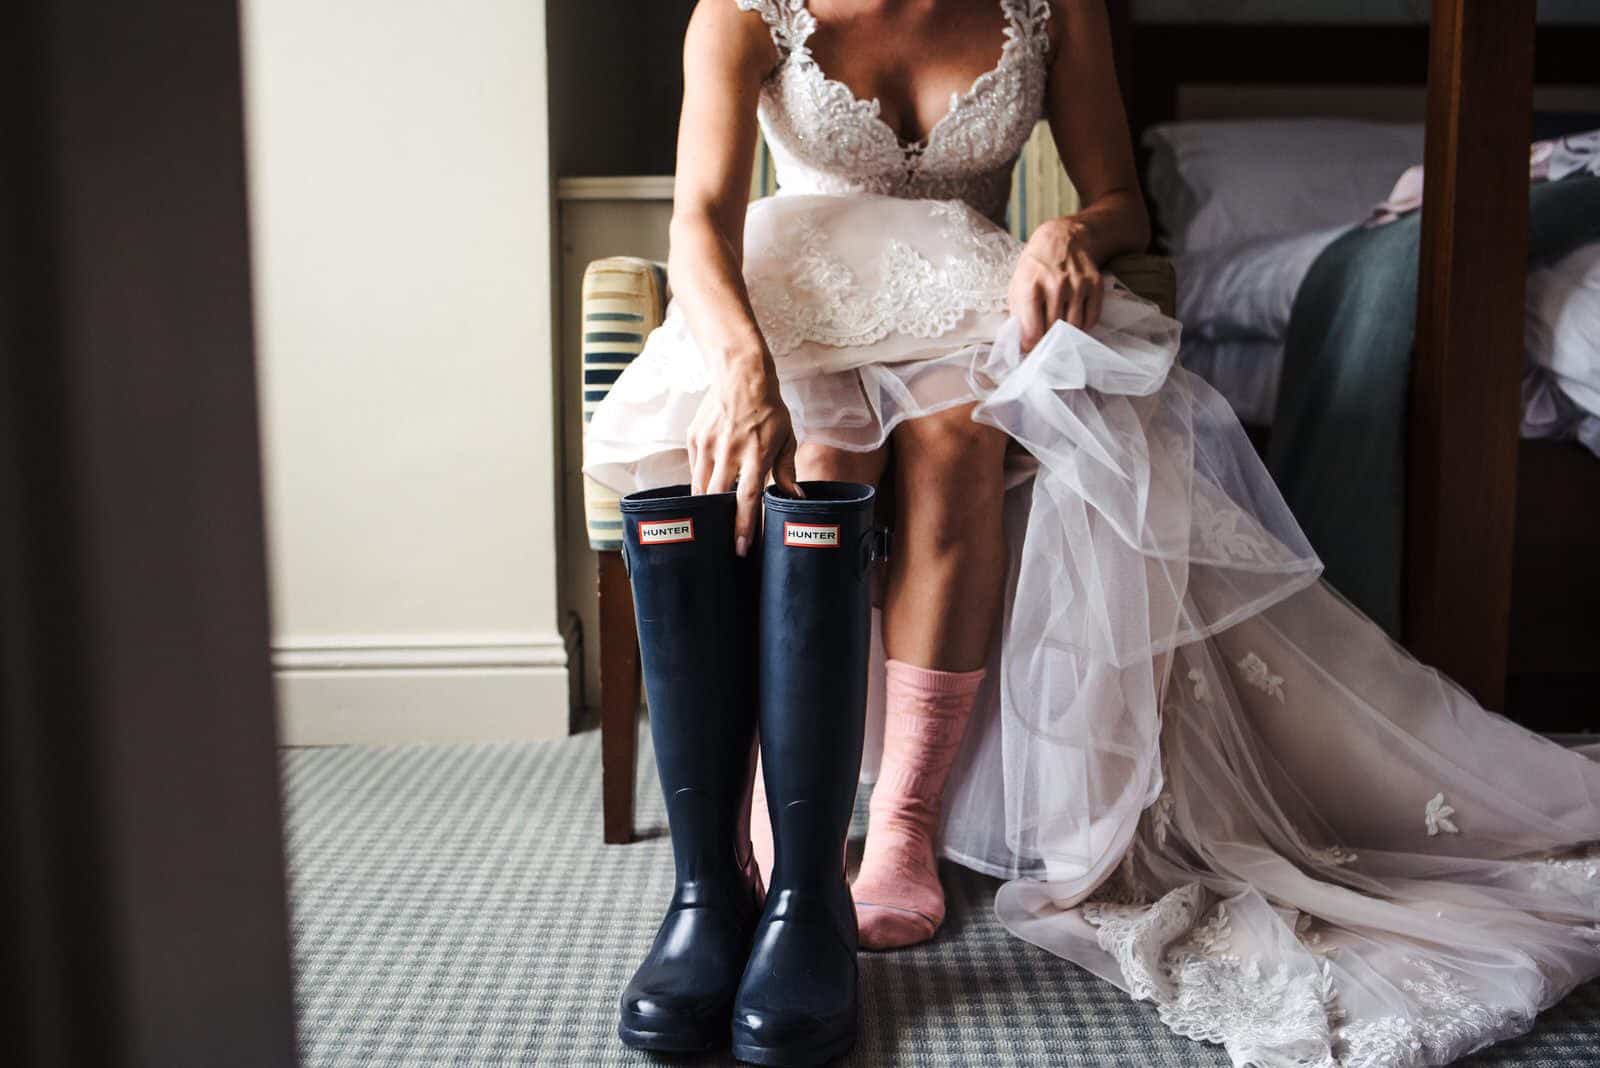 The bride putting on her boots.